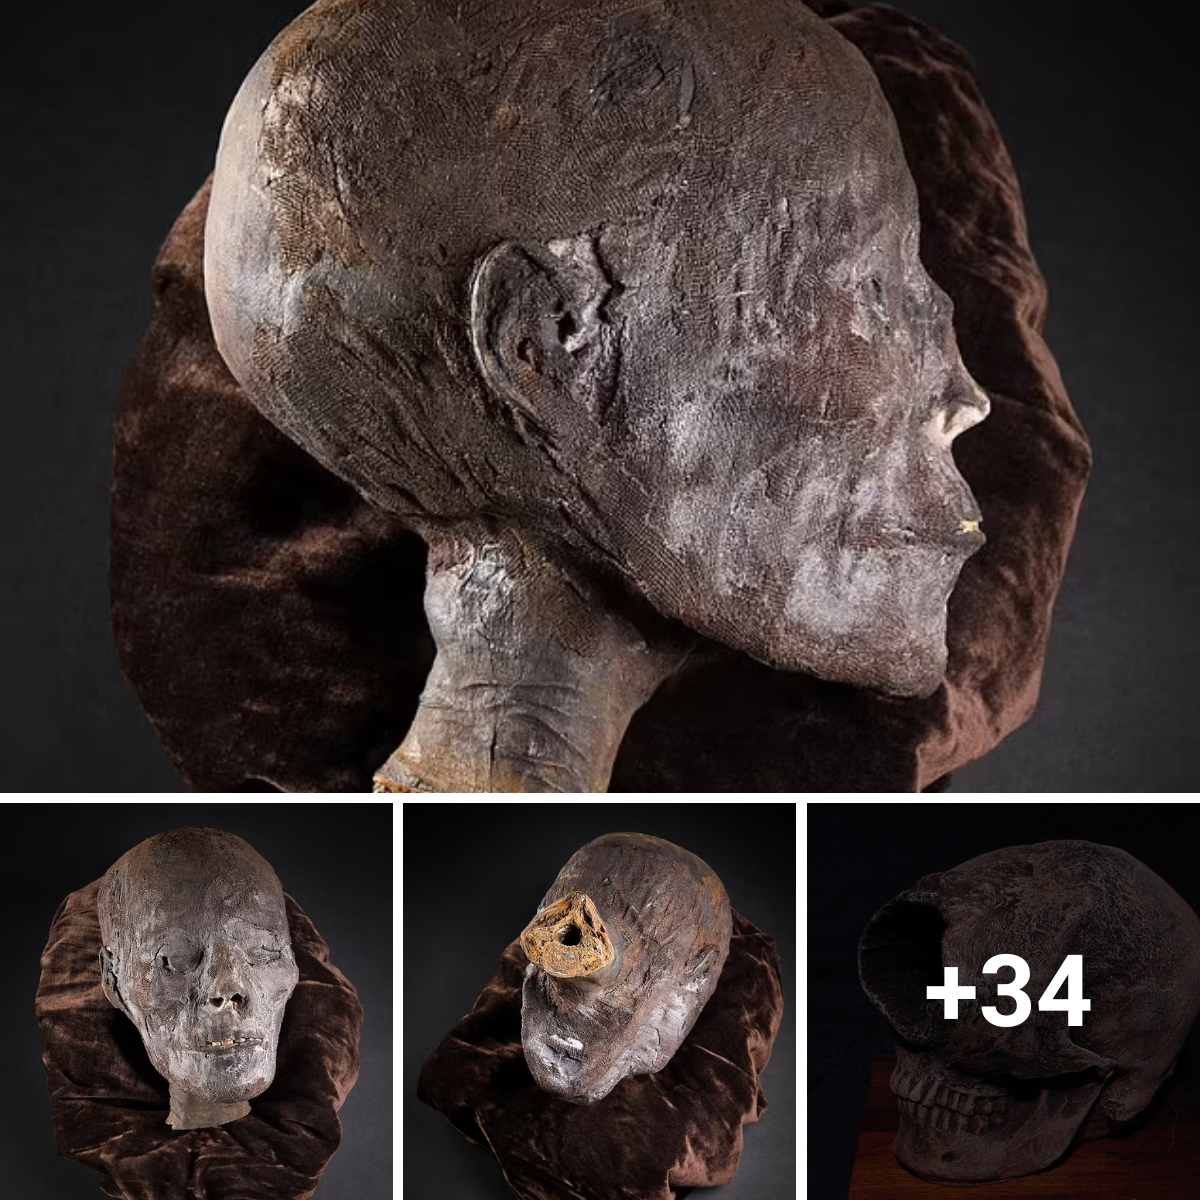 An ancient Egyptian mummified head dating back 2,800 years is being auctioned in the UK.